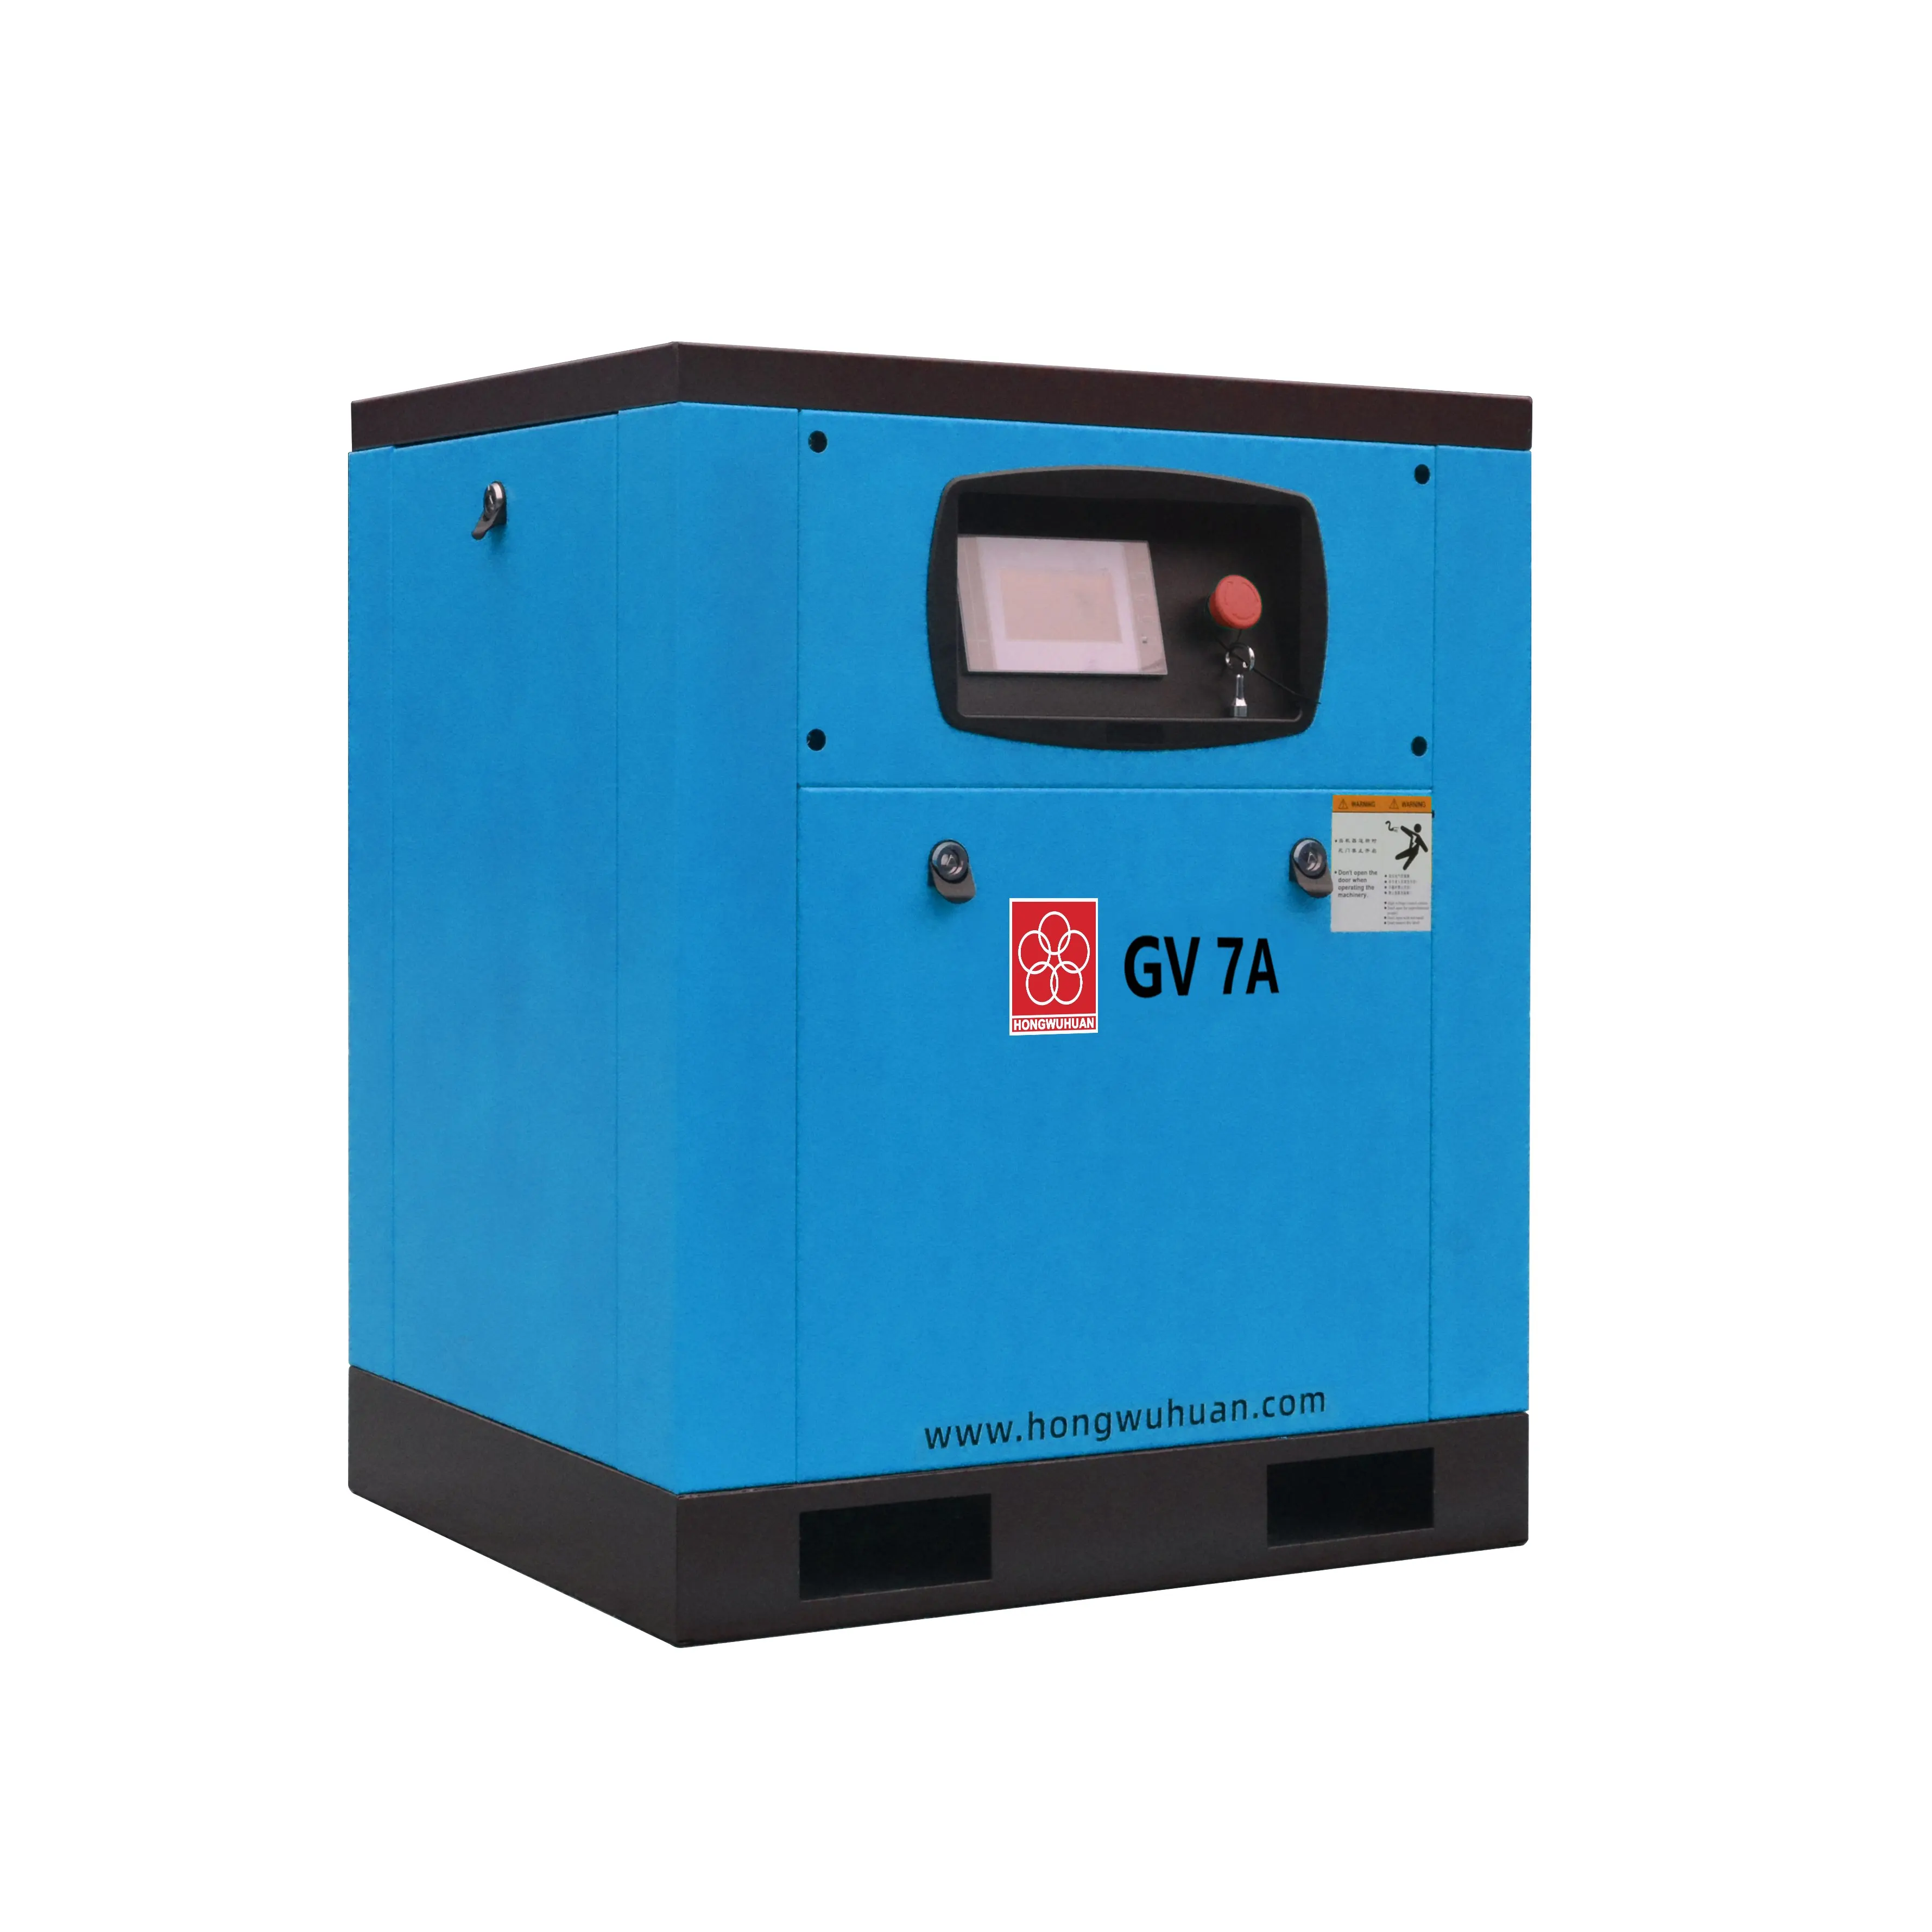 New 7.5kw 8hp DC Industrial Compressor Machine Lubricated Air-Screw Air Compressor for Industry with 8 Bar Working Pressure